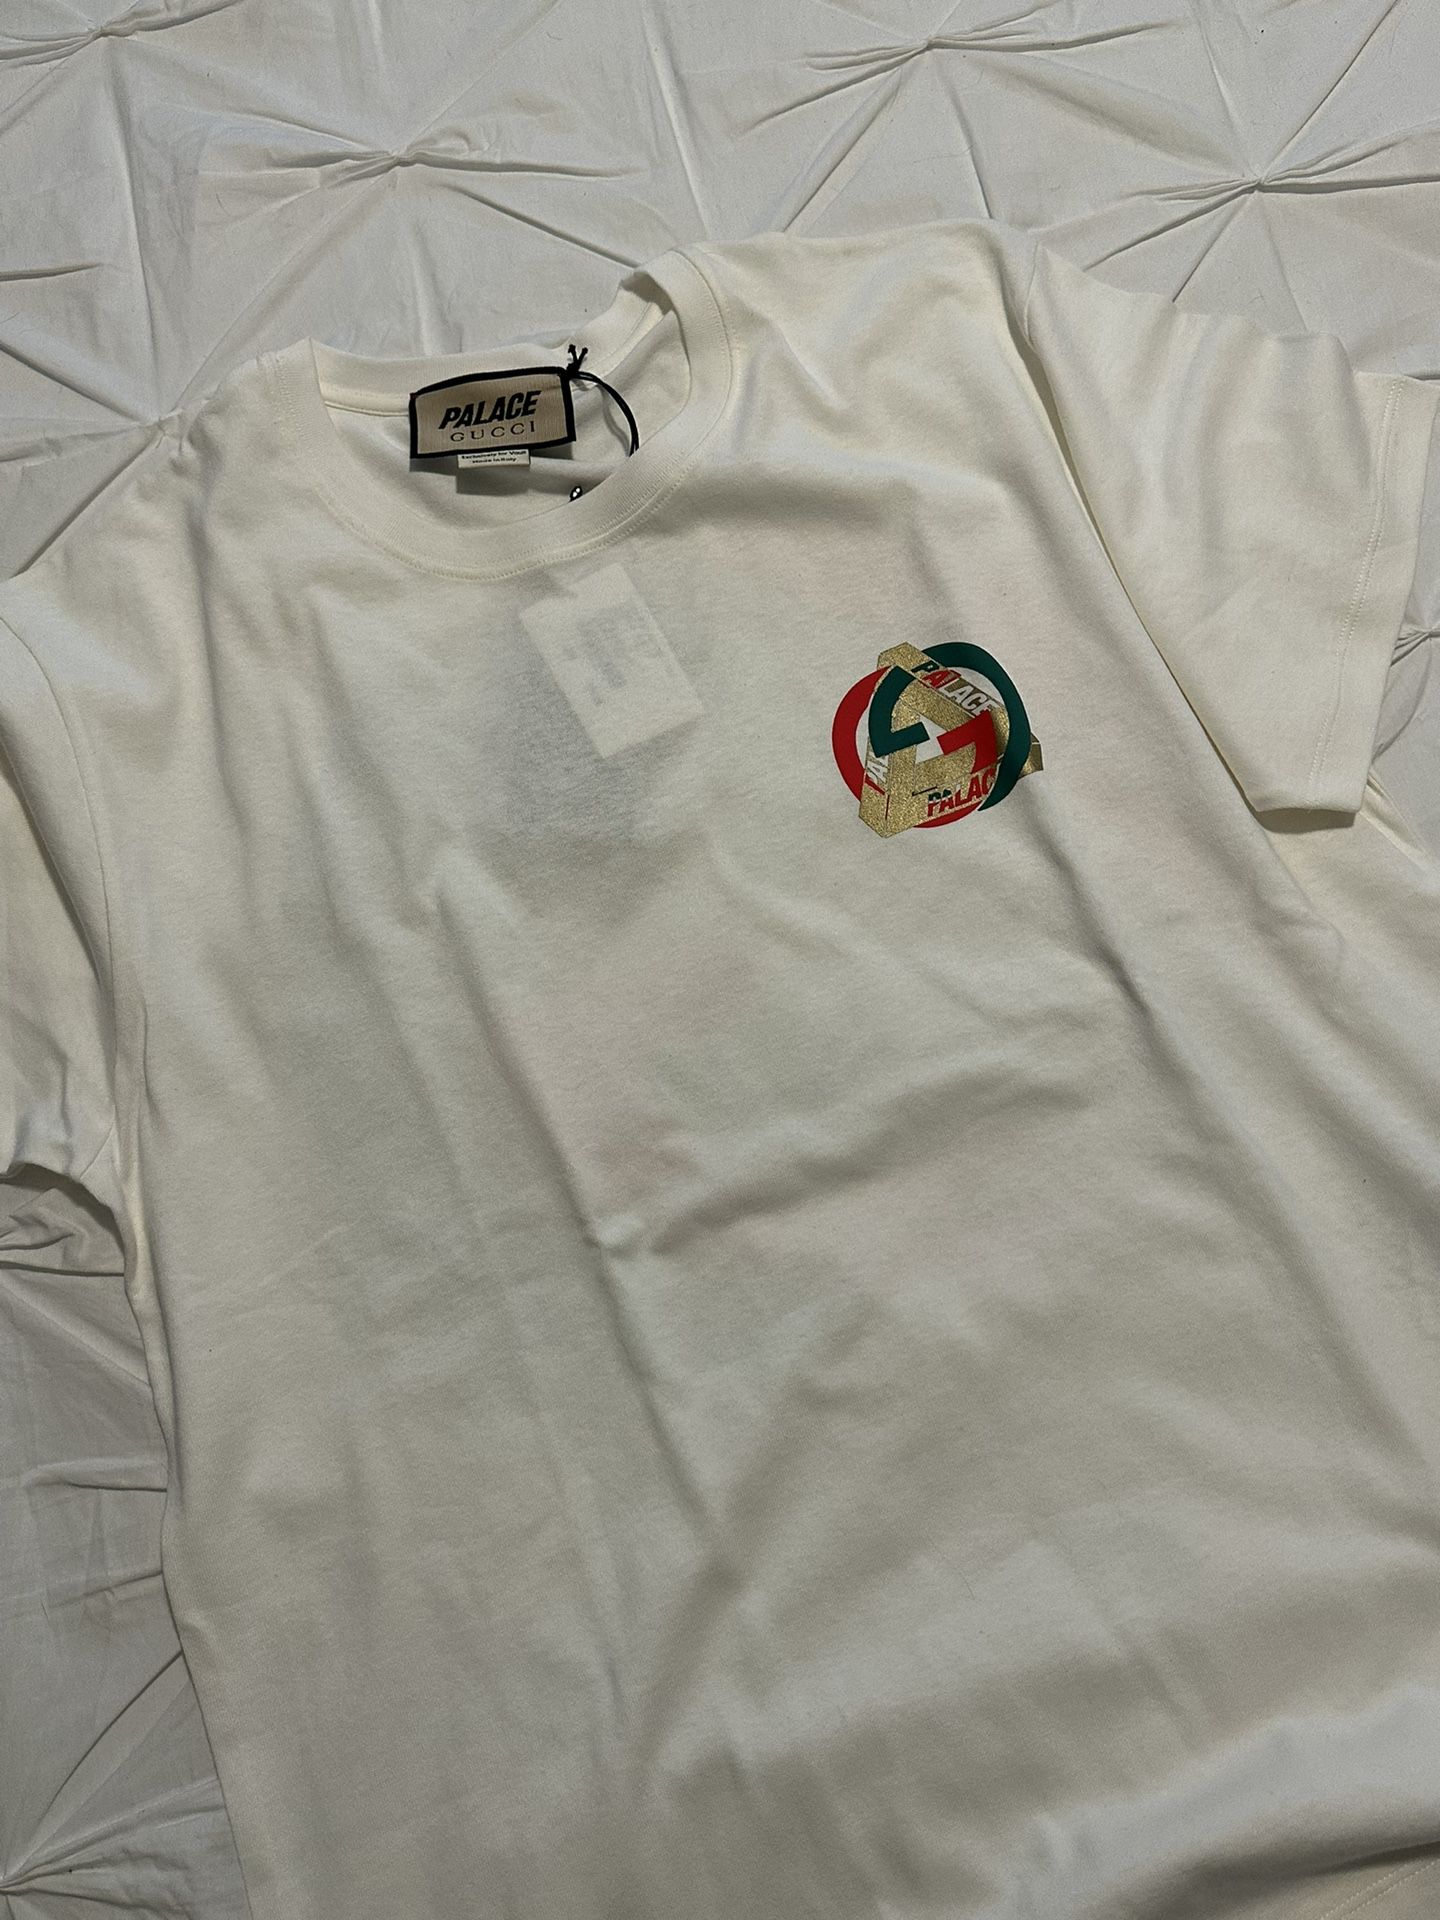 New Gucci Cities T Shirt for Sale in Pompano Beach, FL - OfferUp